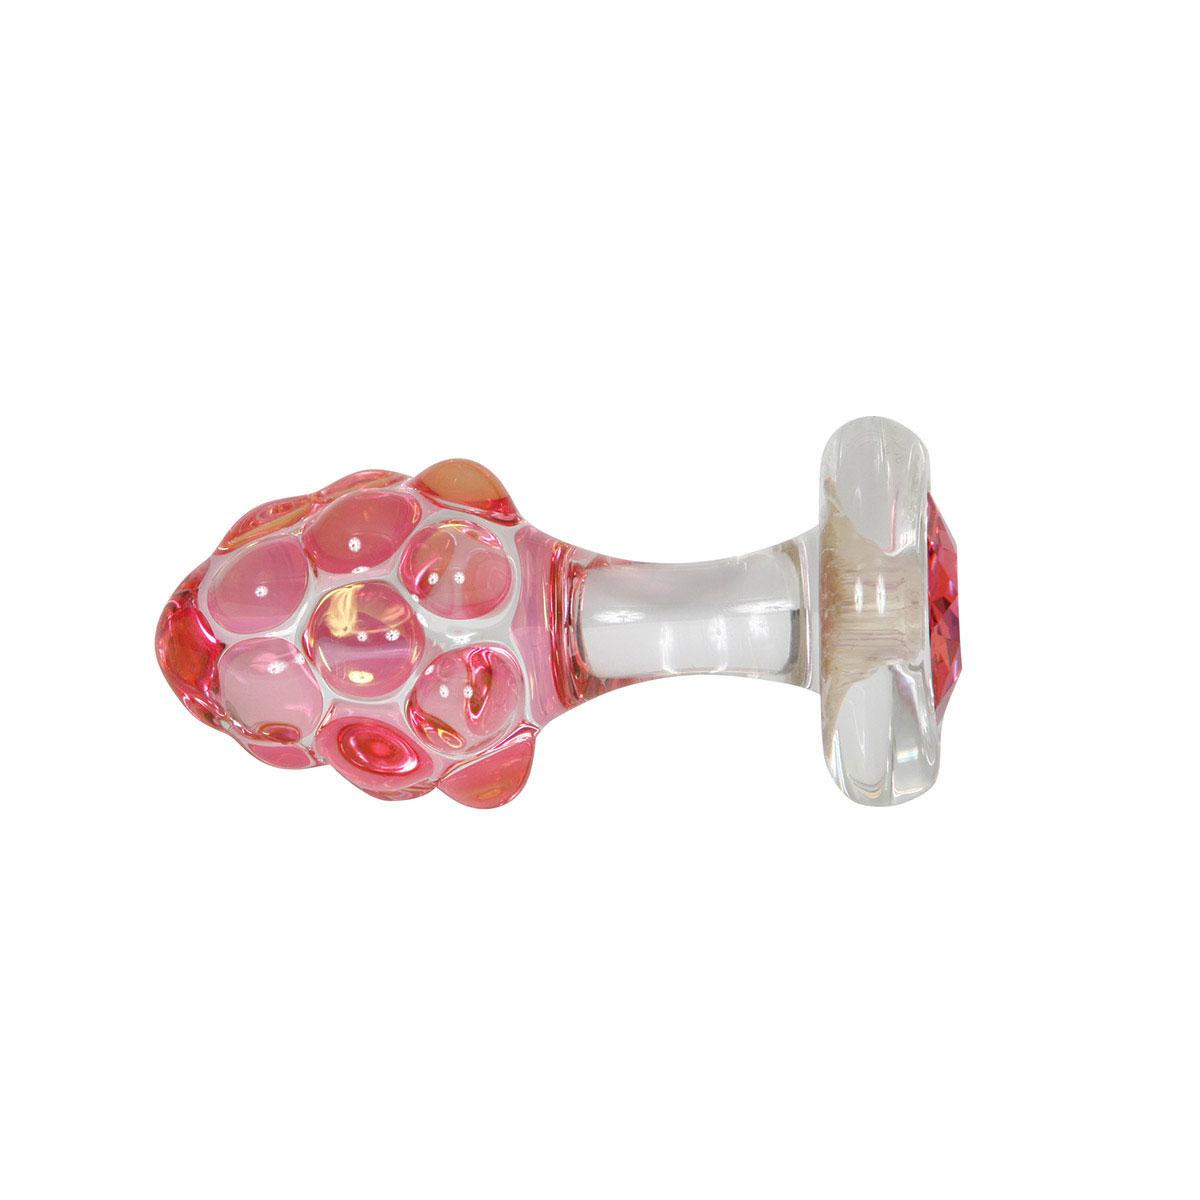 Crystal Delights Pineapple Delight Butt Plug w/ Pink Crystal